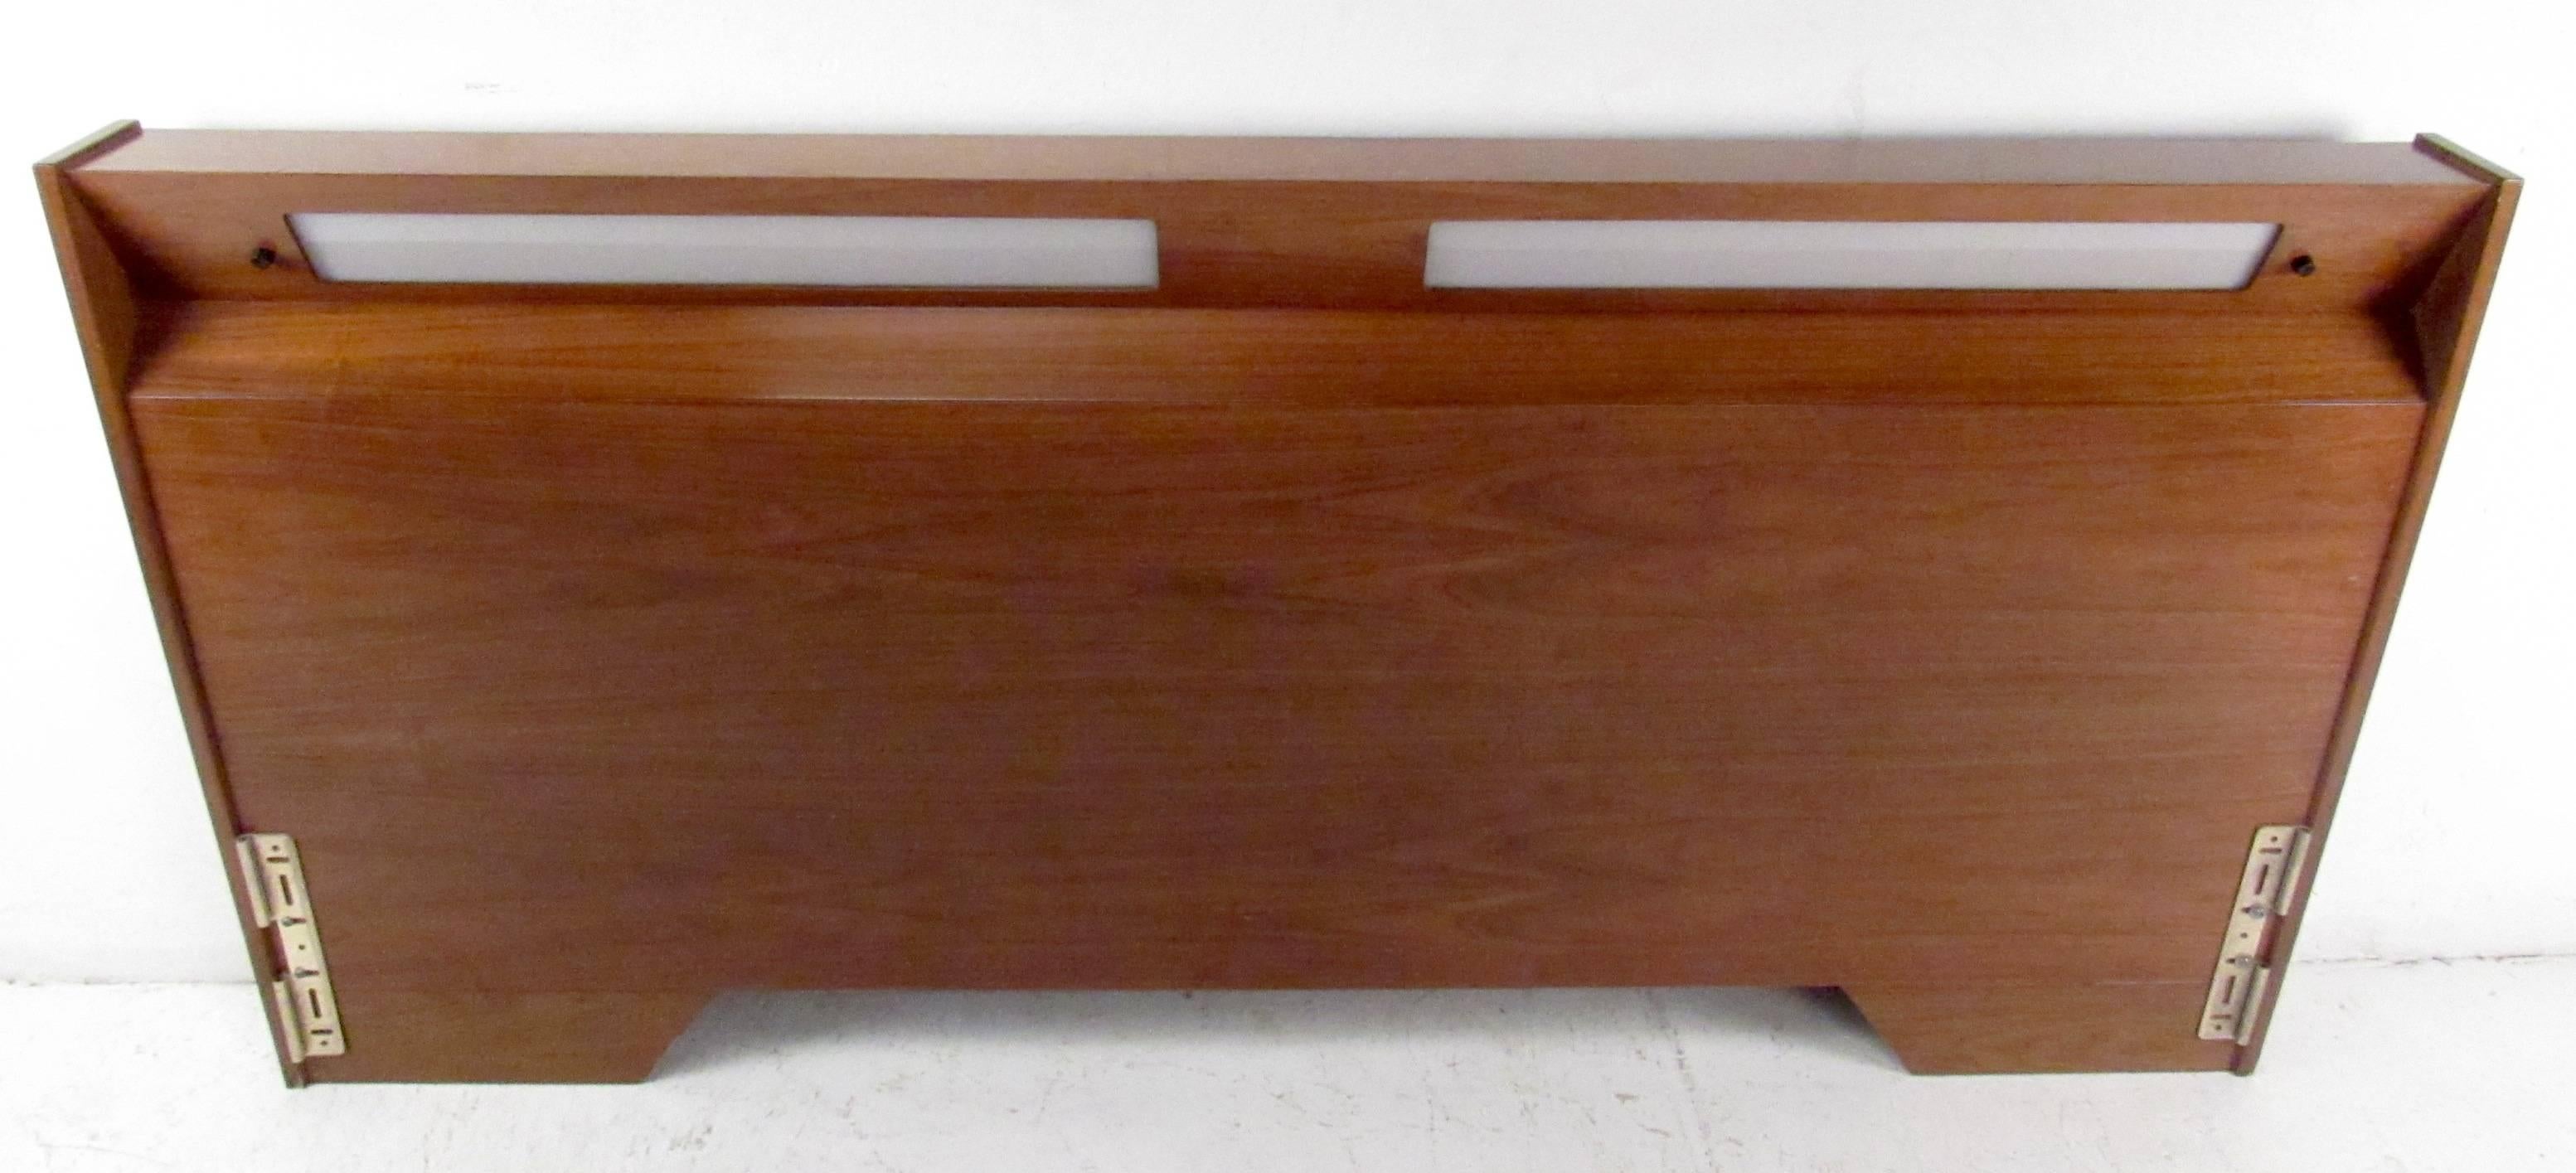 Mid-century modern headboard featuring rich walnut wood grain, impressive king size headboard perfect addition to any bedroom setting.

Please confirm item location NY or NJ with dealer.